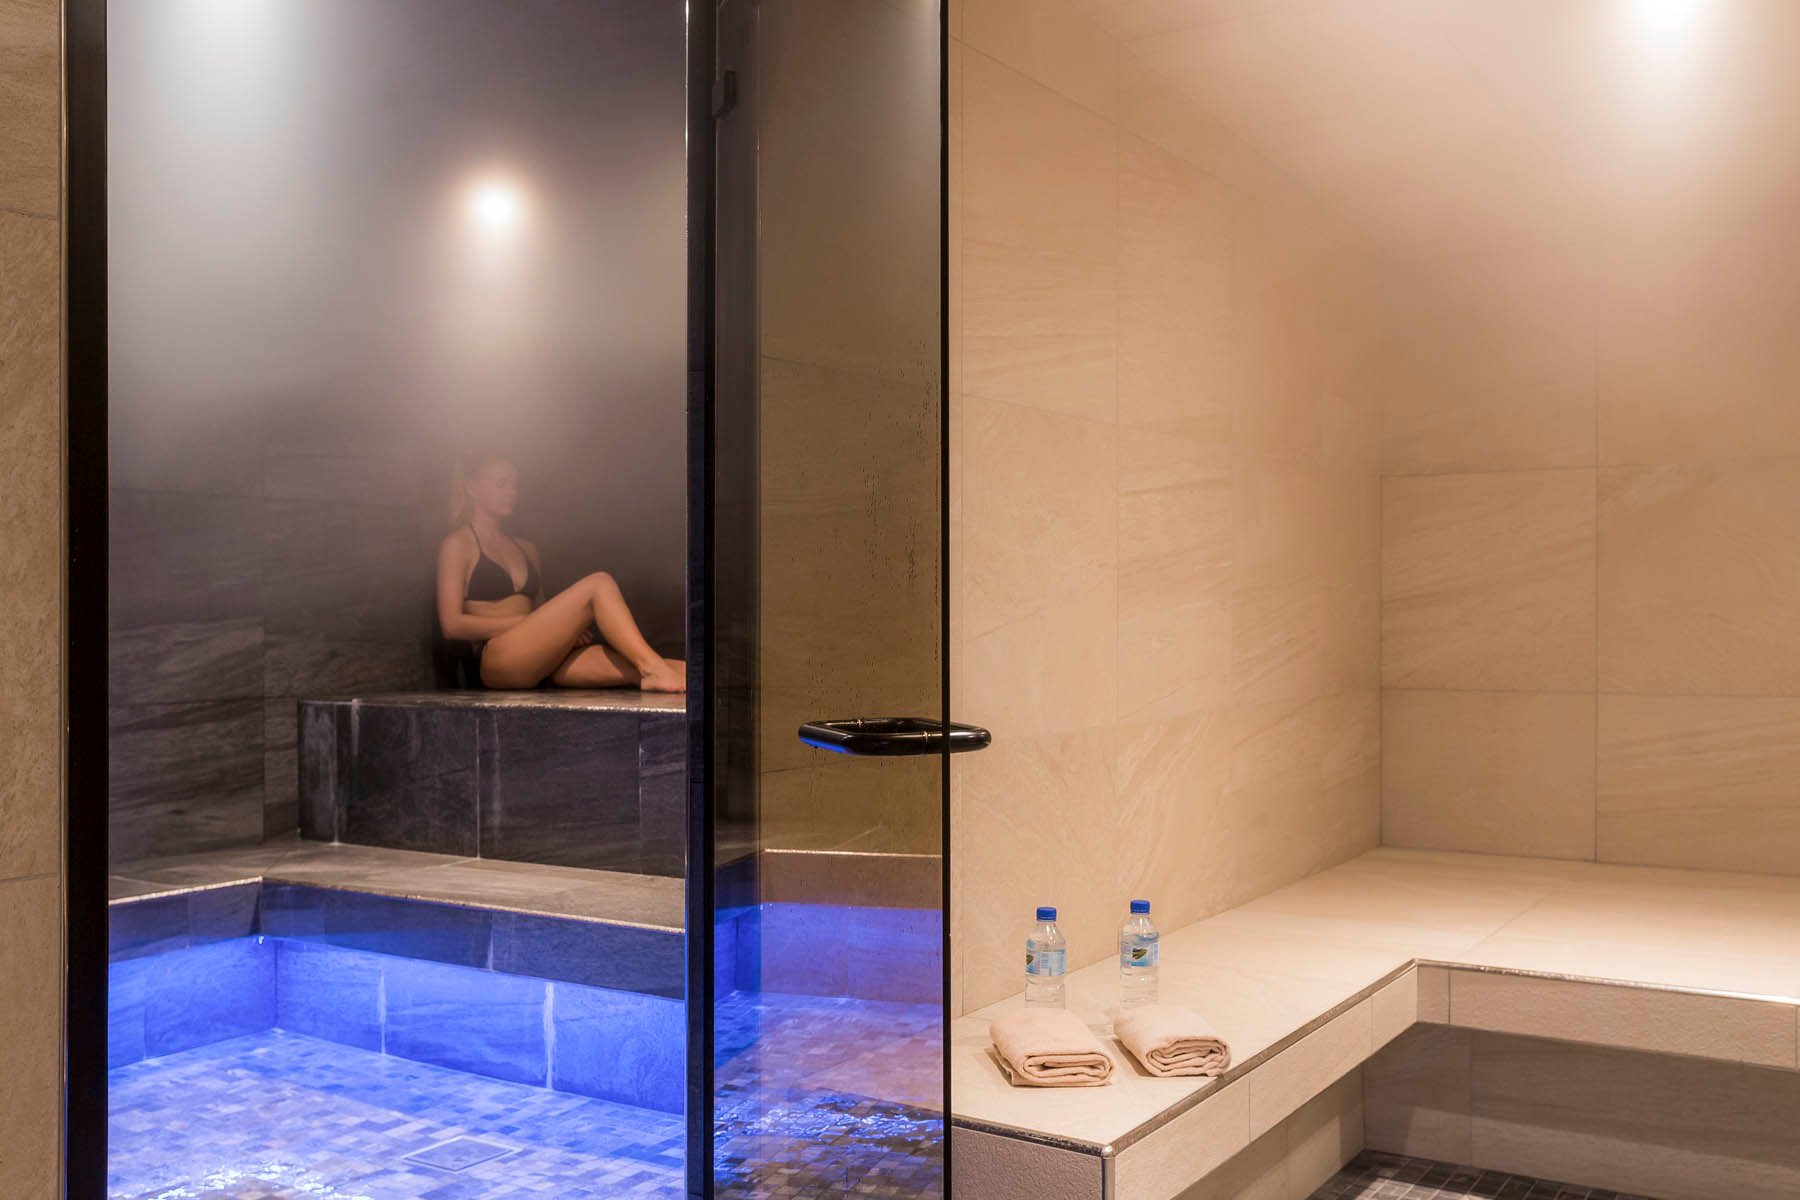 Steam room and sauna at the "Pure Altitude" Spa